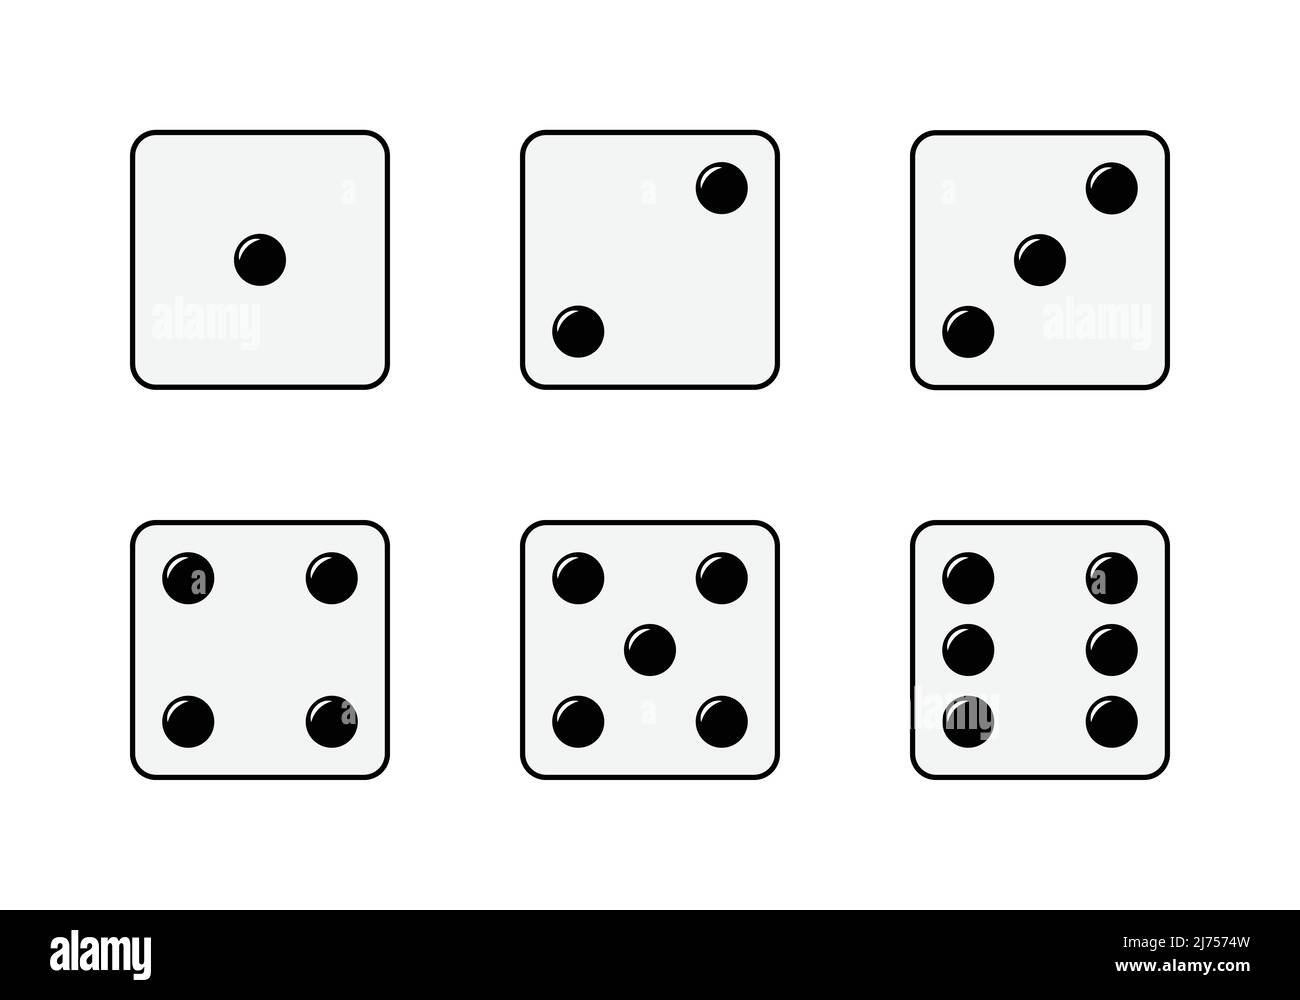 Dice set with six faces with different numbers of dots isolated on white background Stock Vector